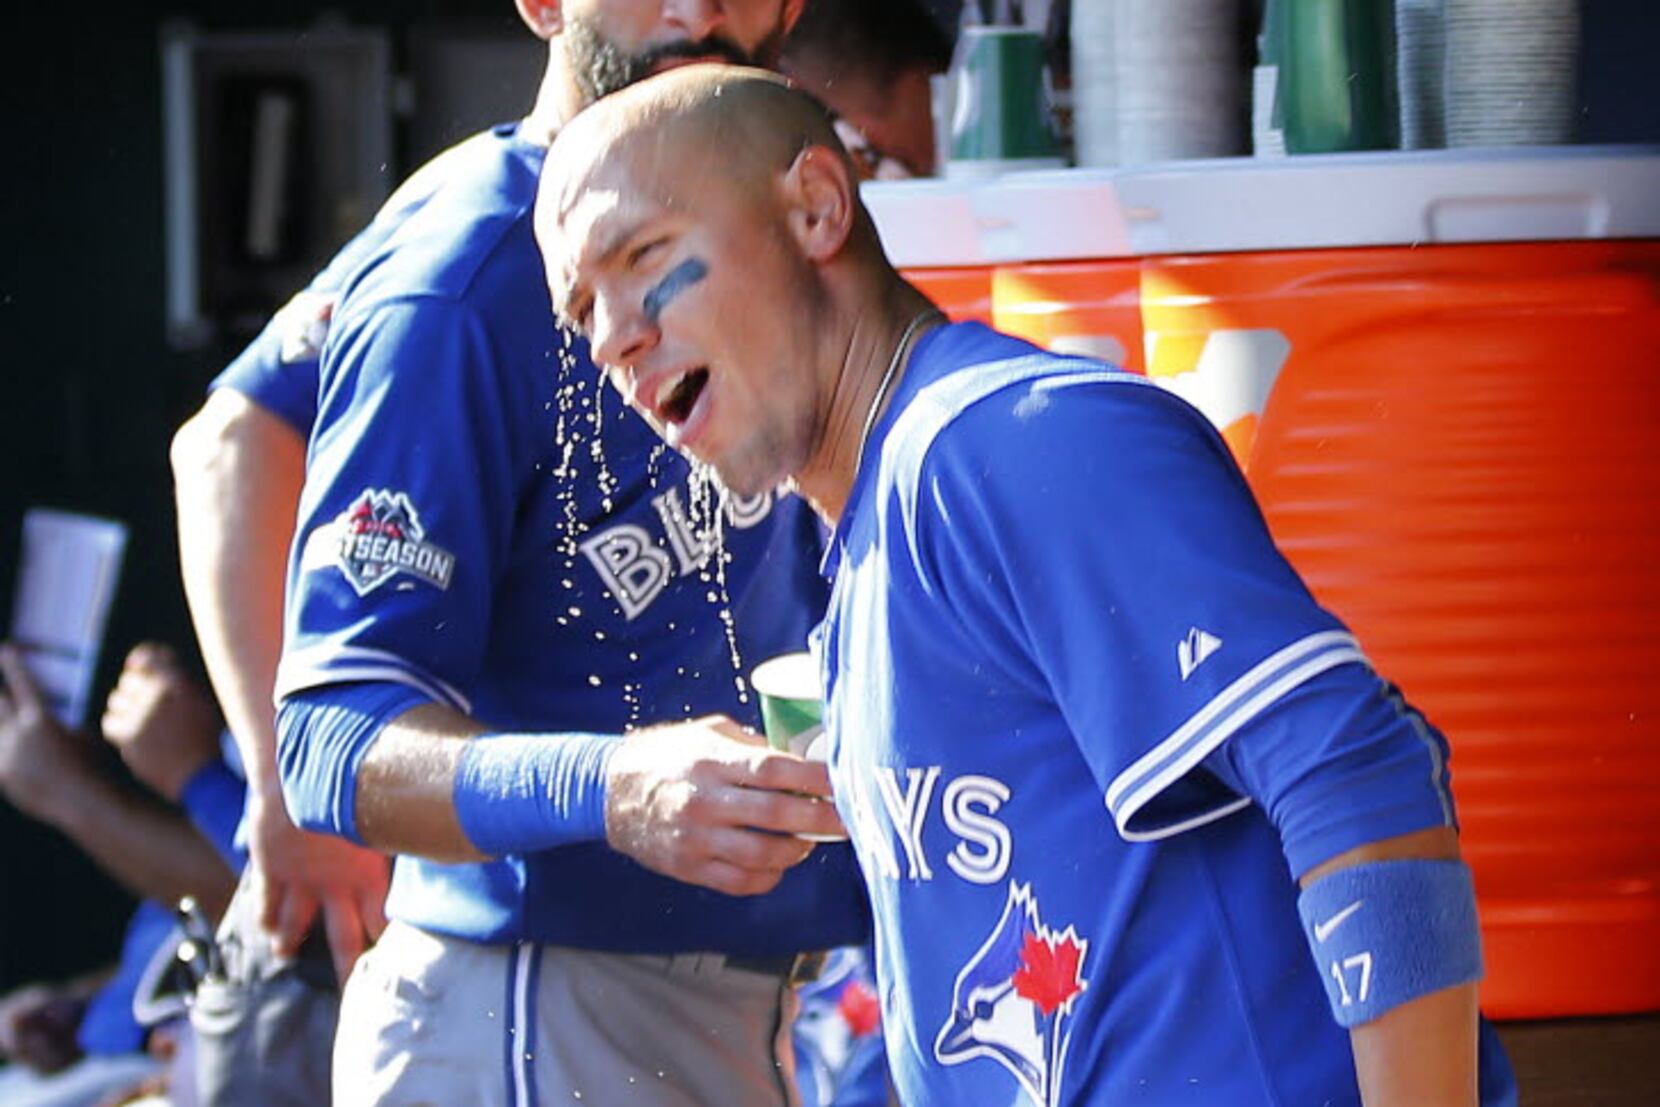 Ryan Goins Called Up to the Show by Blue Jays - Dallas Baptist